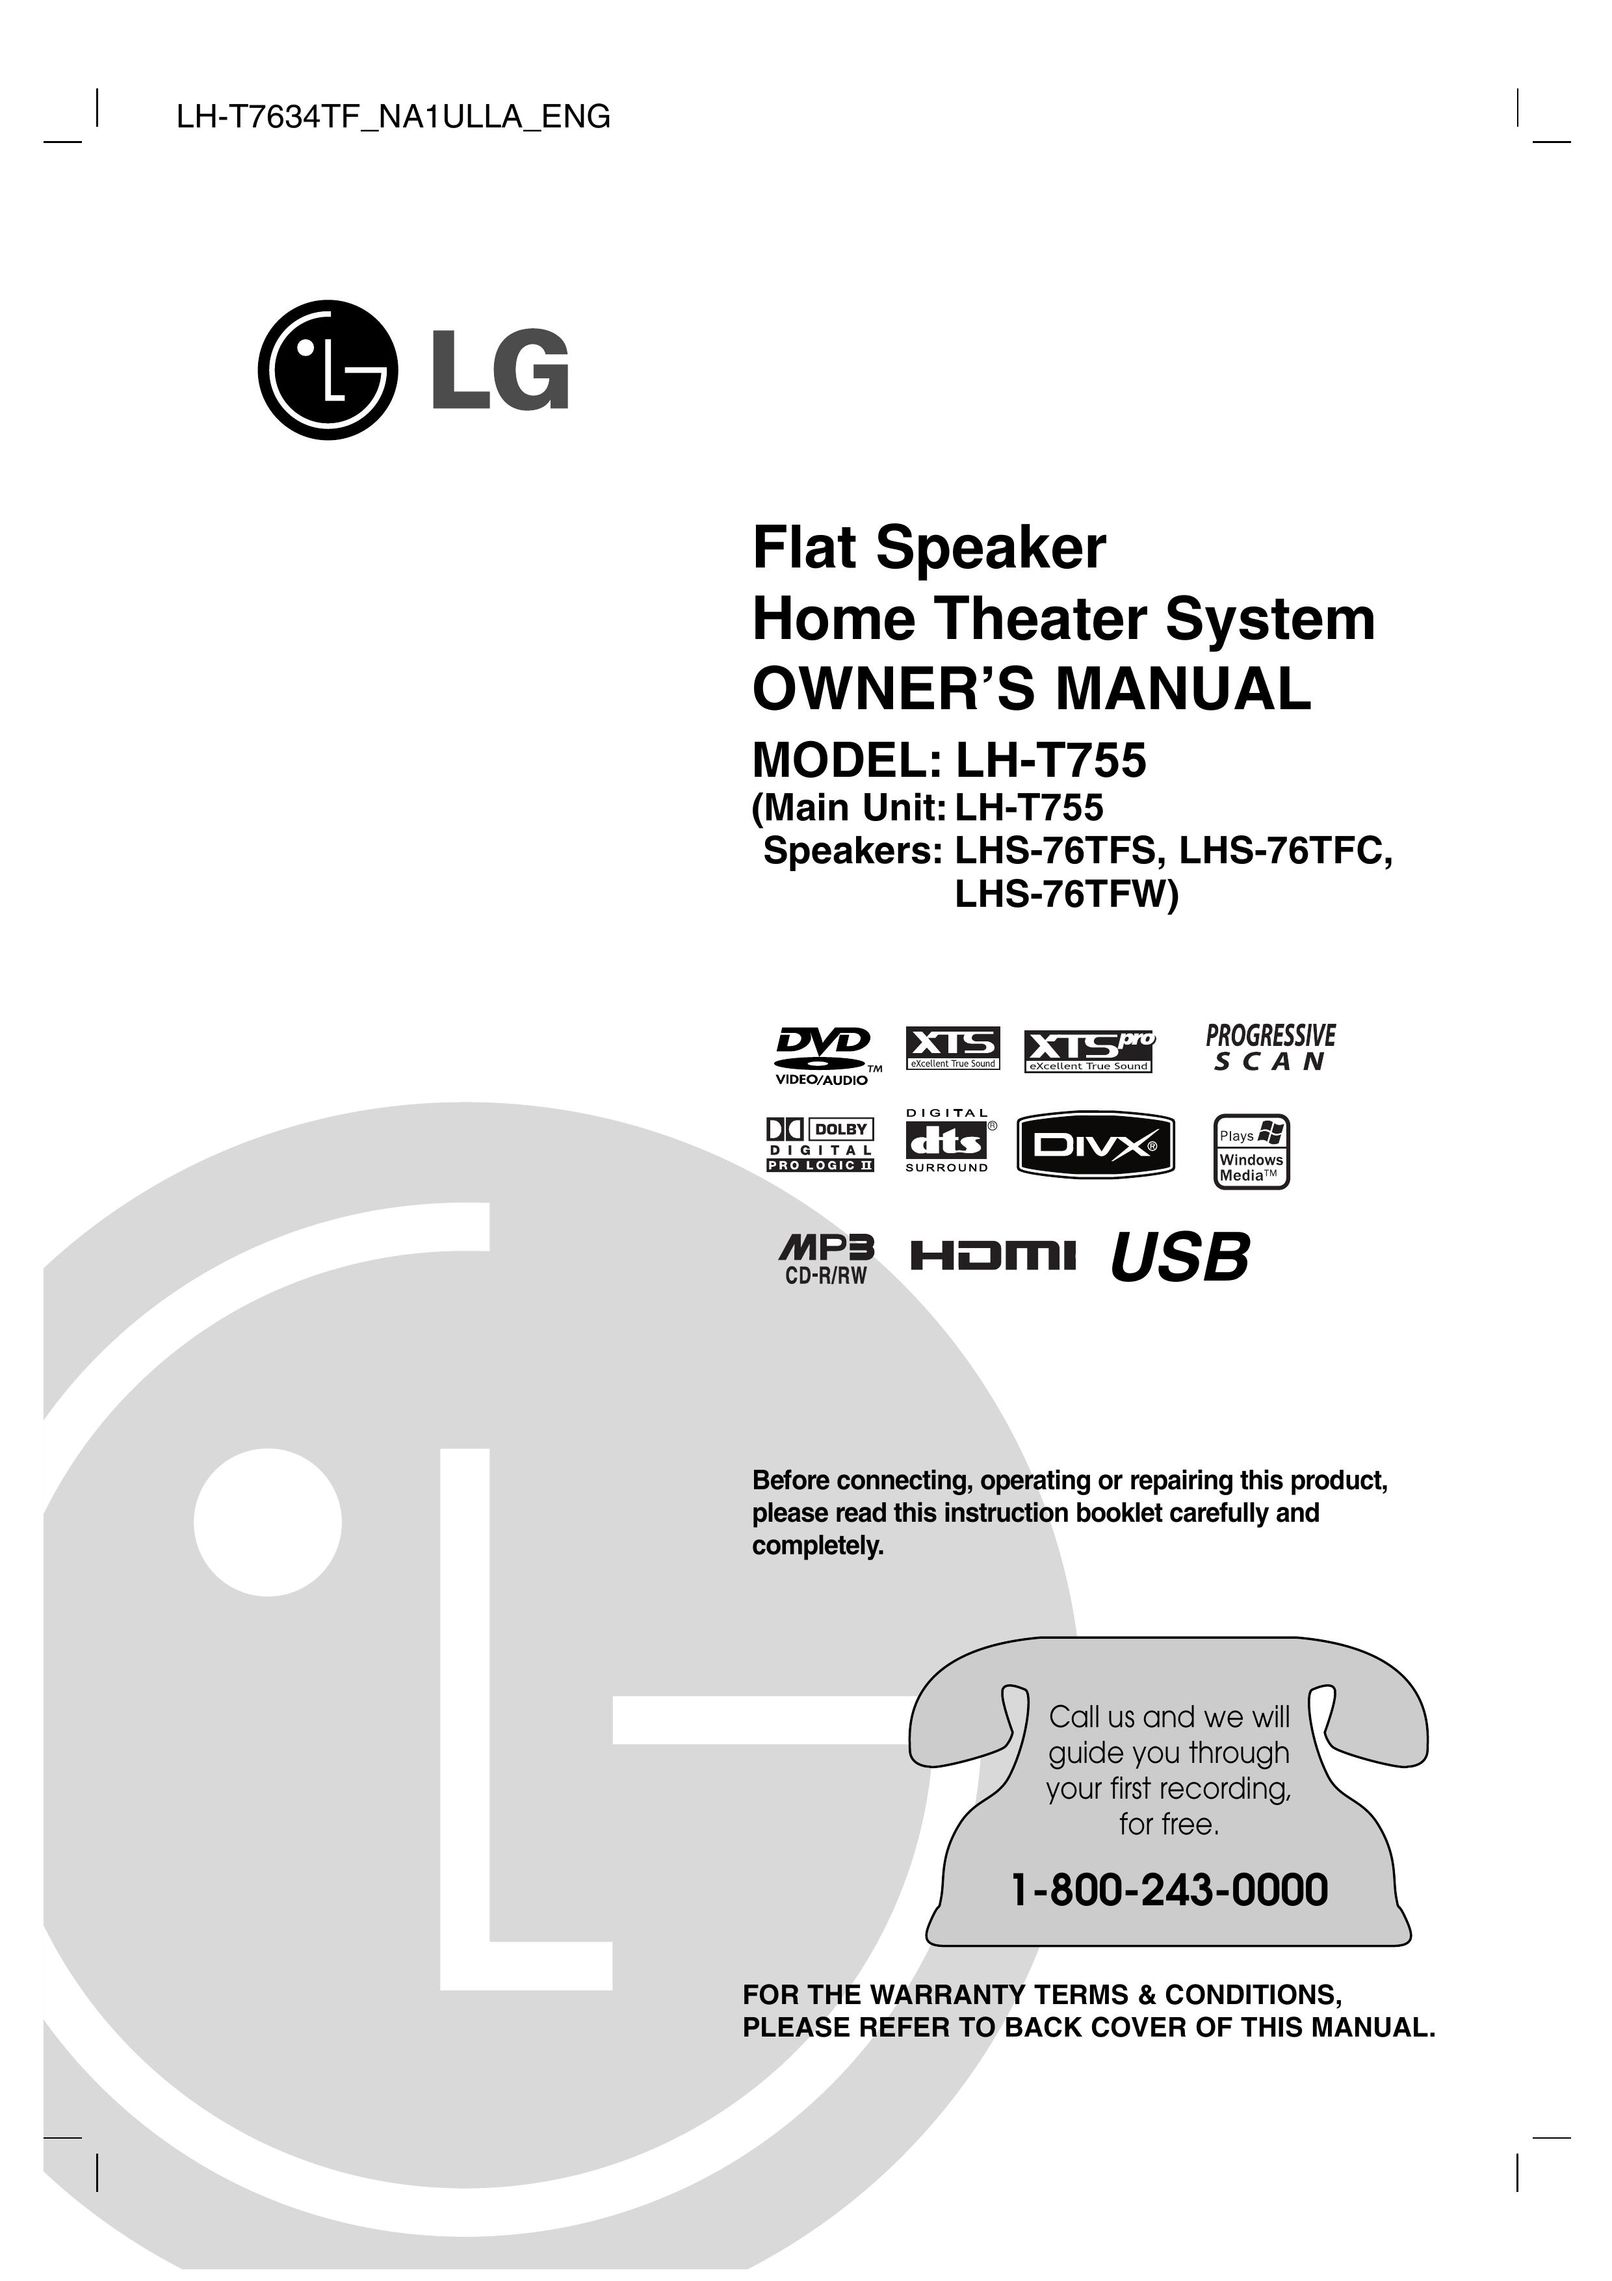 LG Electronics LHS-76TFW Home Theater System User Manual